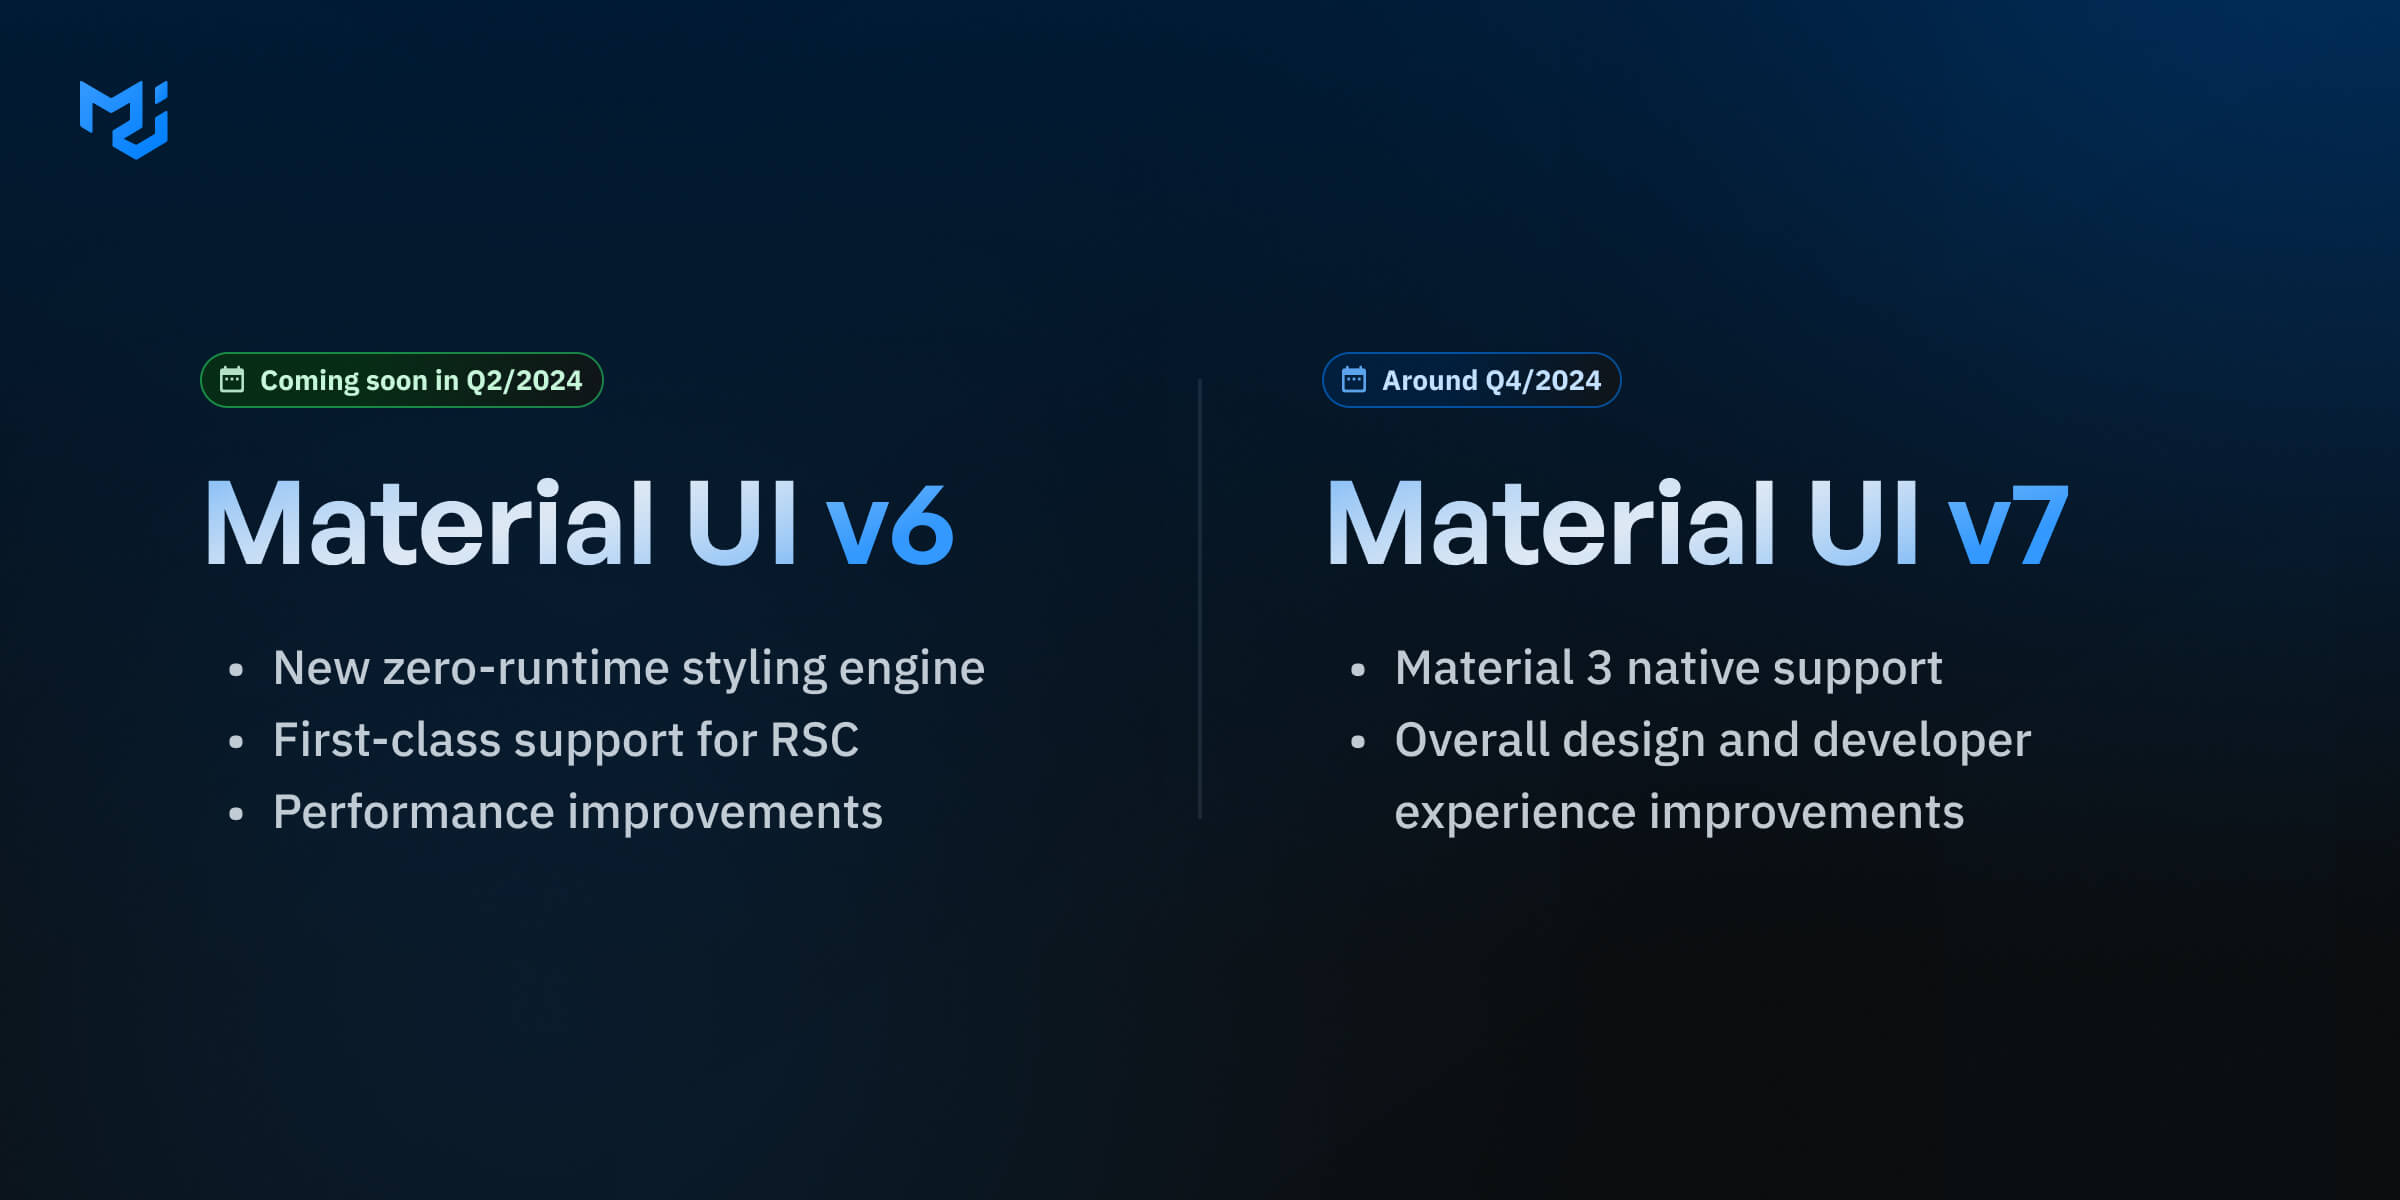 A summary about the major changes coming in Material UI v6 and v7